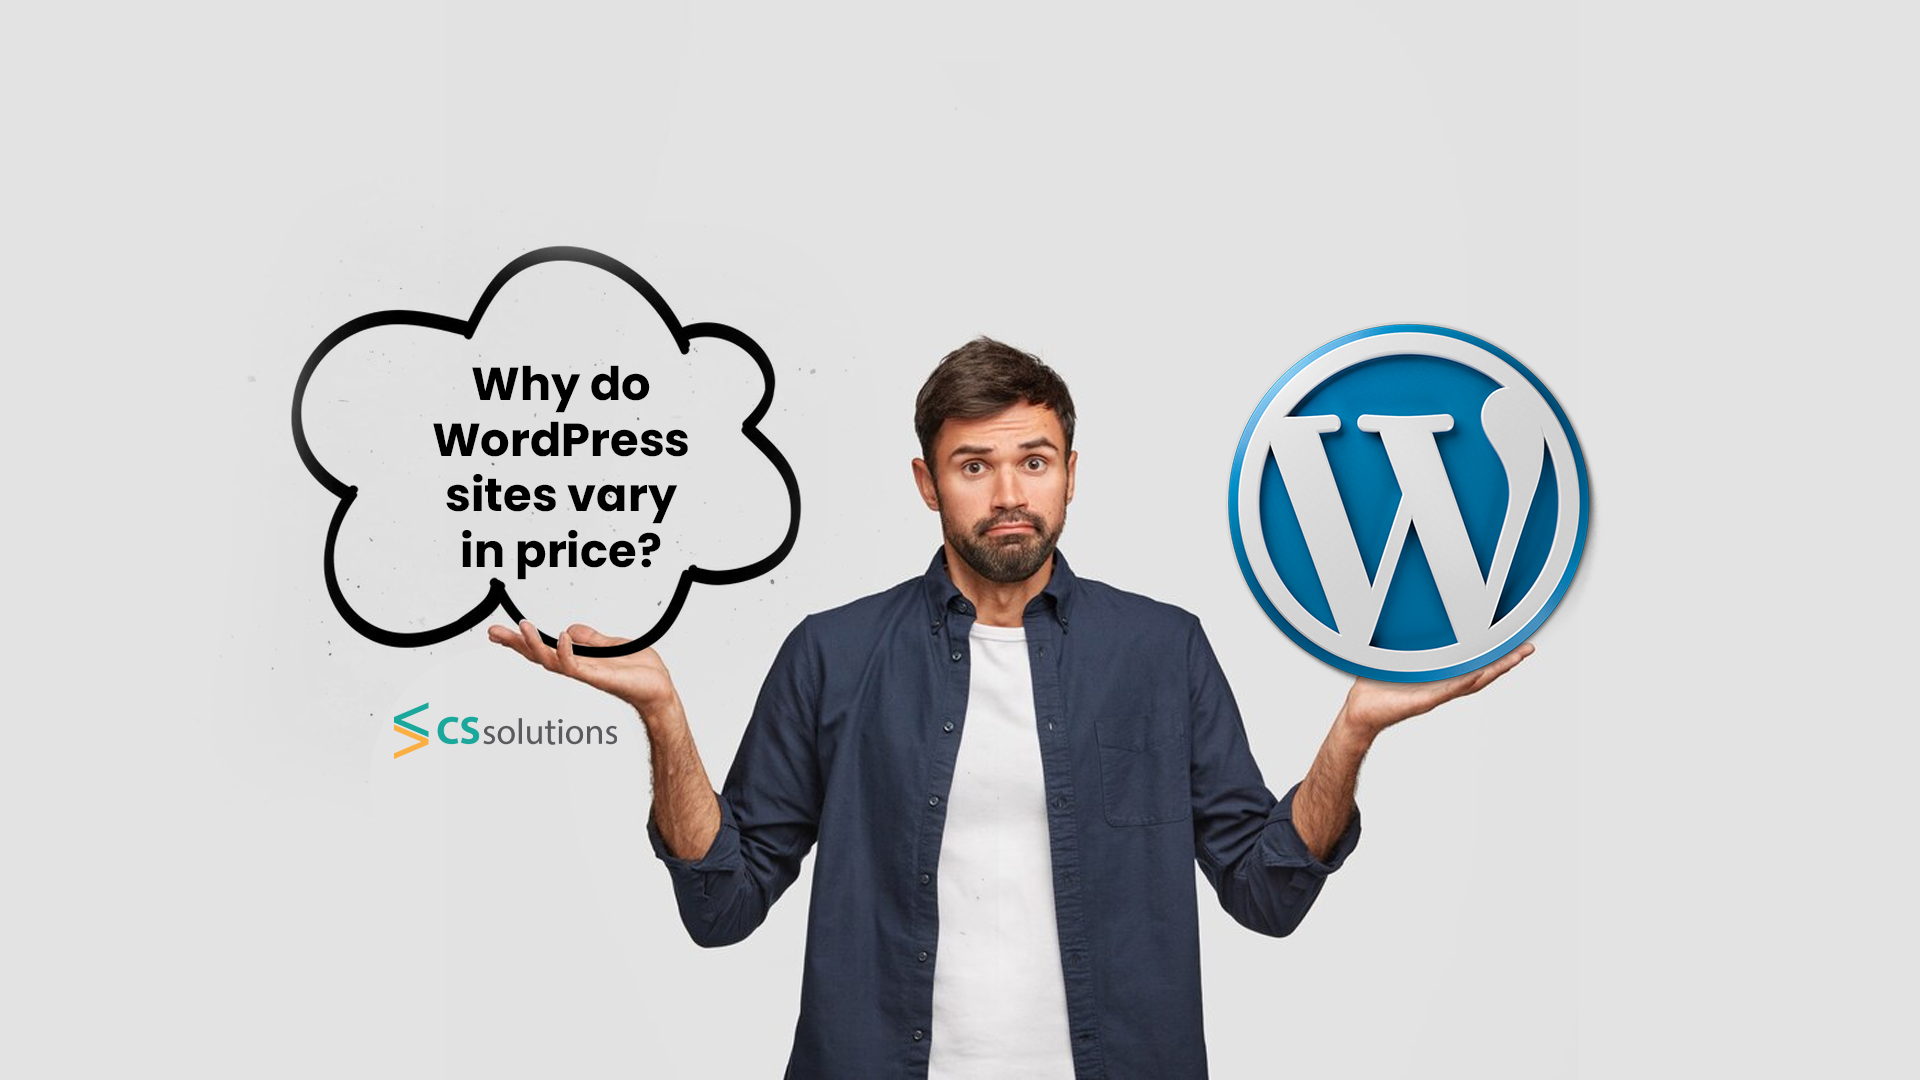 Why do WordPress sites vary in price?